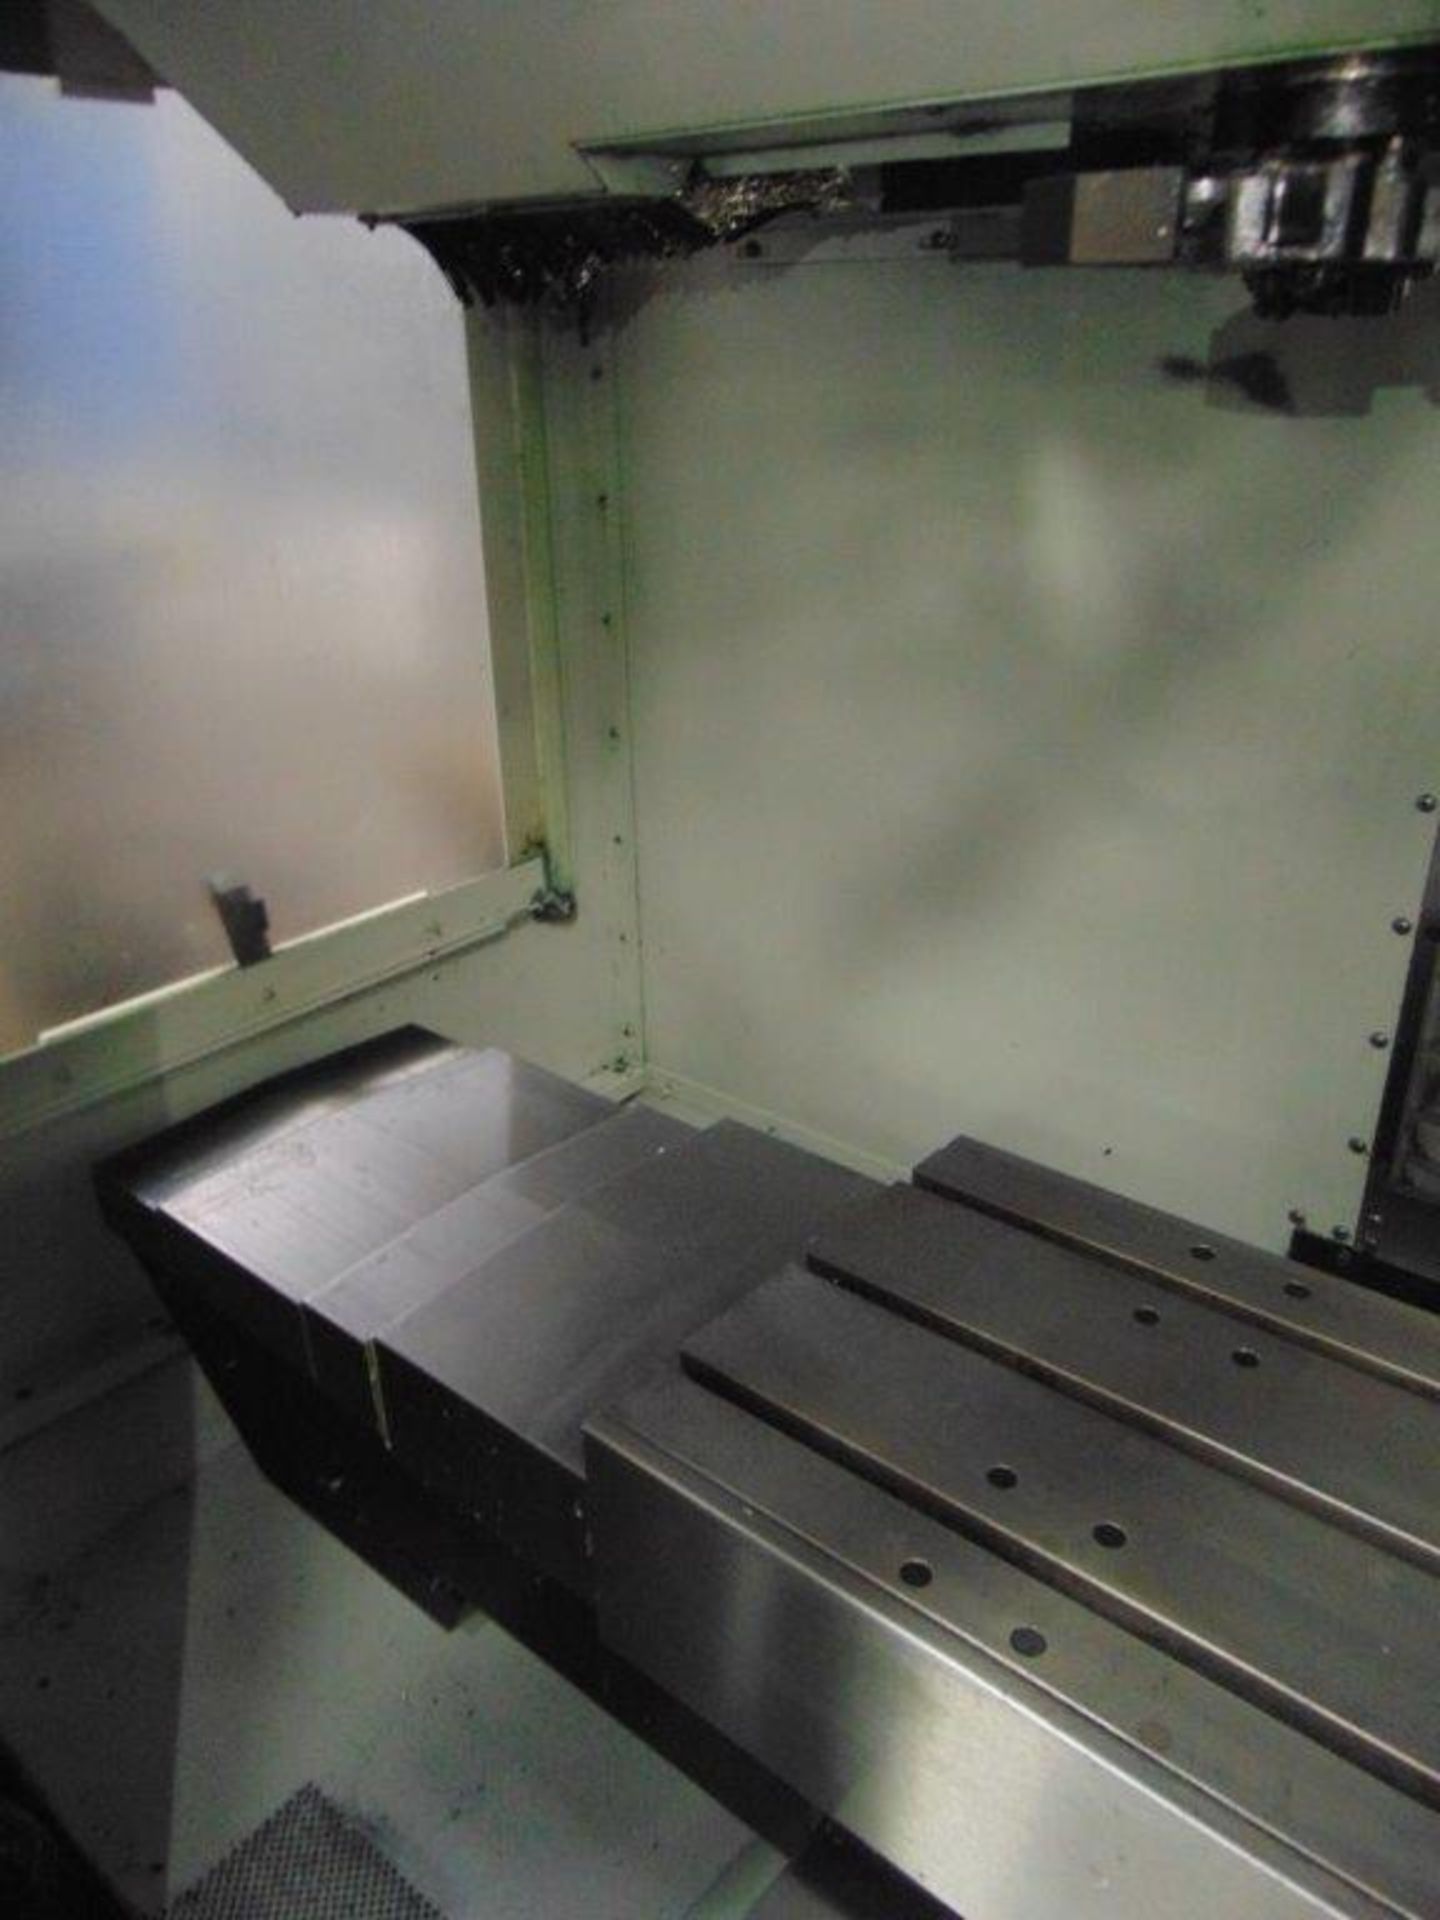 2012 HAAS VF-2SS CNC VERTICAL MACHINING CENTER, S/N 1097466, 30" x 16" x 20"TRAVELS, 30HP, 12,000RPM - Image 5 of 11